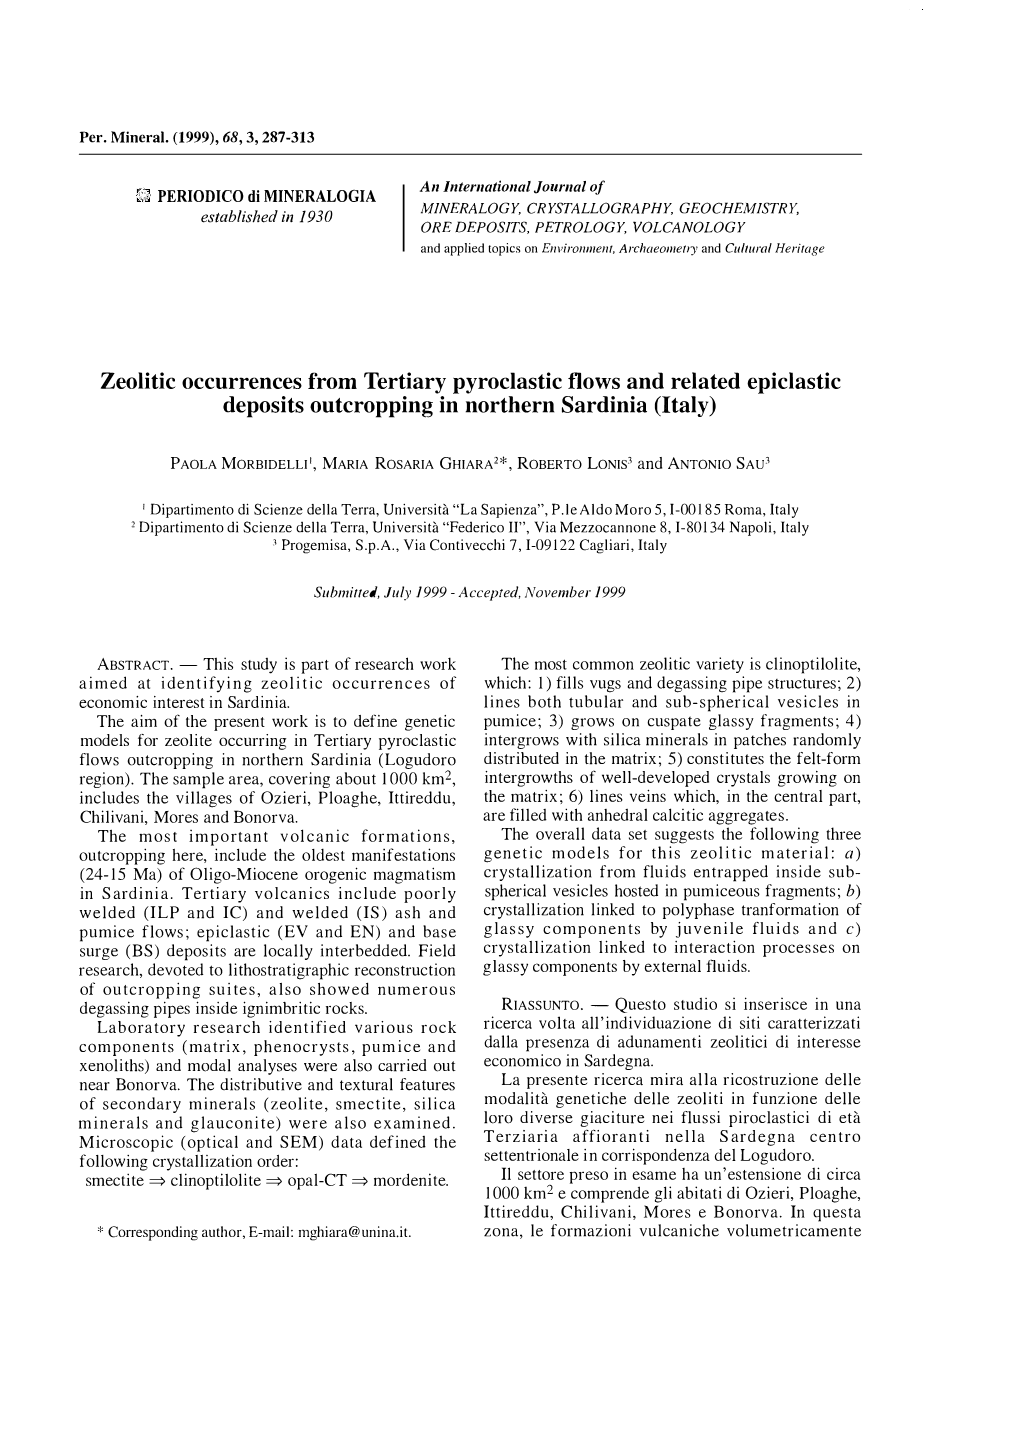 Zeolitic Occurrences from Tertiary Pyroclastic Flows and Related Epiclastic Deposits Outcropping in Northern Sardinia (Italy)